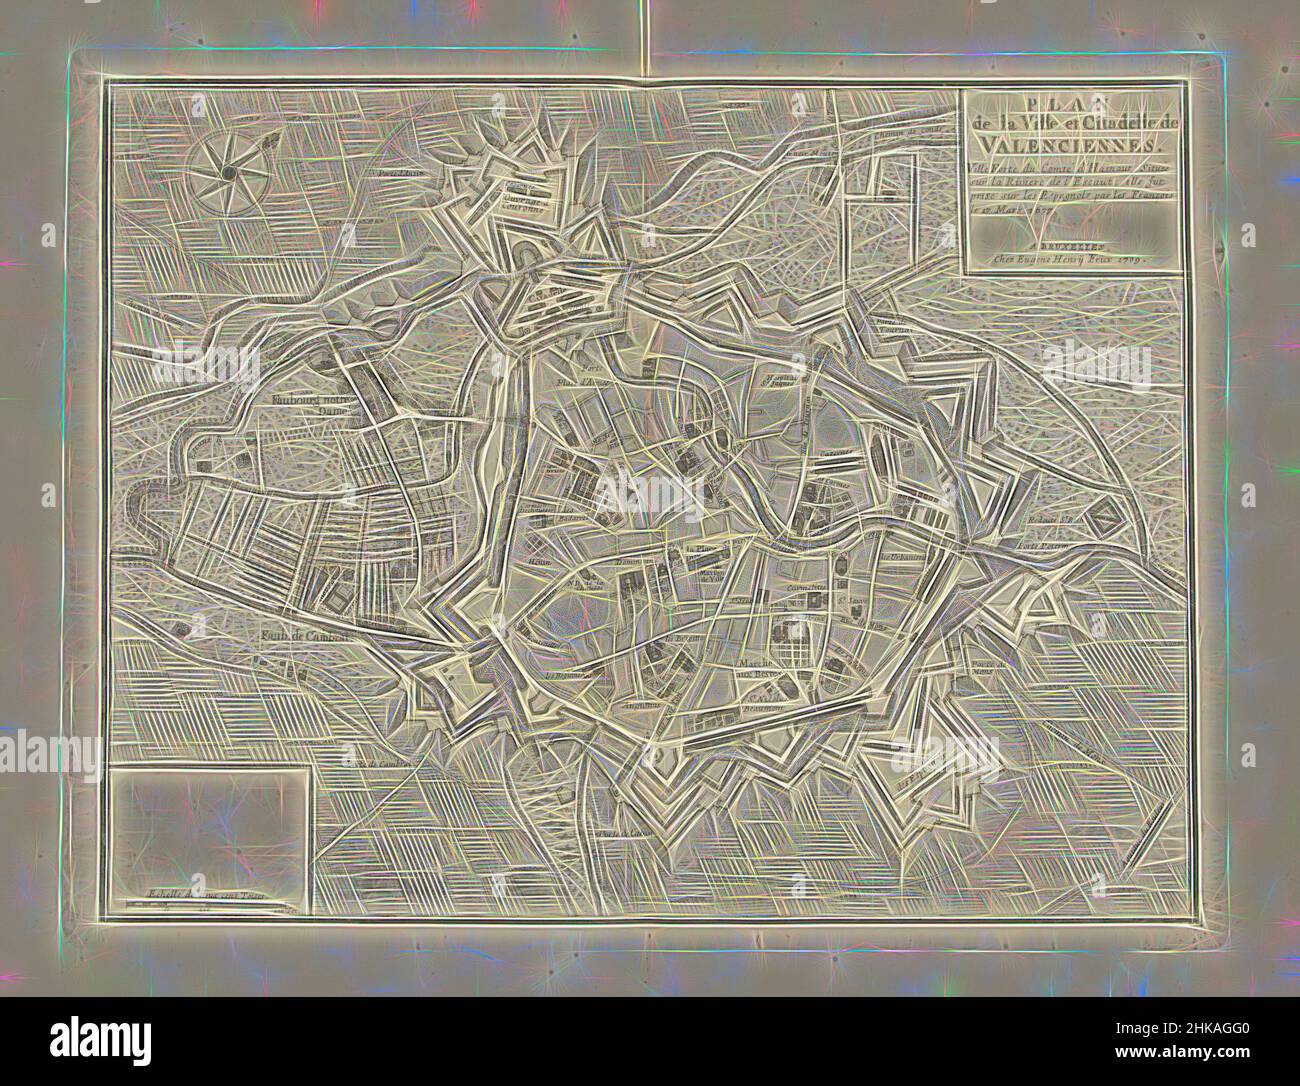 Inspired by Map of Valenciennes, 1709, Plan de la Ville et Citadelle de Valenciennes, Map of Valenciennes, 1709. Part of a bundled collection of plans of battles and cities renowned in the War of the Spanish Succession., print maker: Jacobus Harrewijn, publisher: Eugene Henry Fricx, Brussels, 1709, Reimagined by Artotop. Classic art reinvented with a modern twist. Design of warm cheerful glowing of brightness and light ray radiance. Photography inspired by surrealism and futurism, embracing dynamic energy of modern technology, movement, speed and revolutionize culture Stock Photo